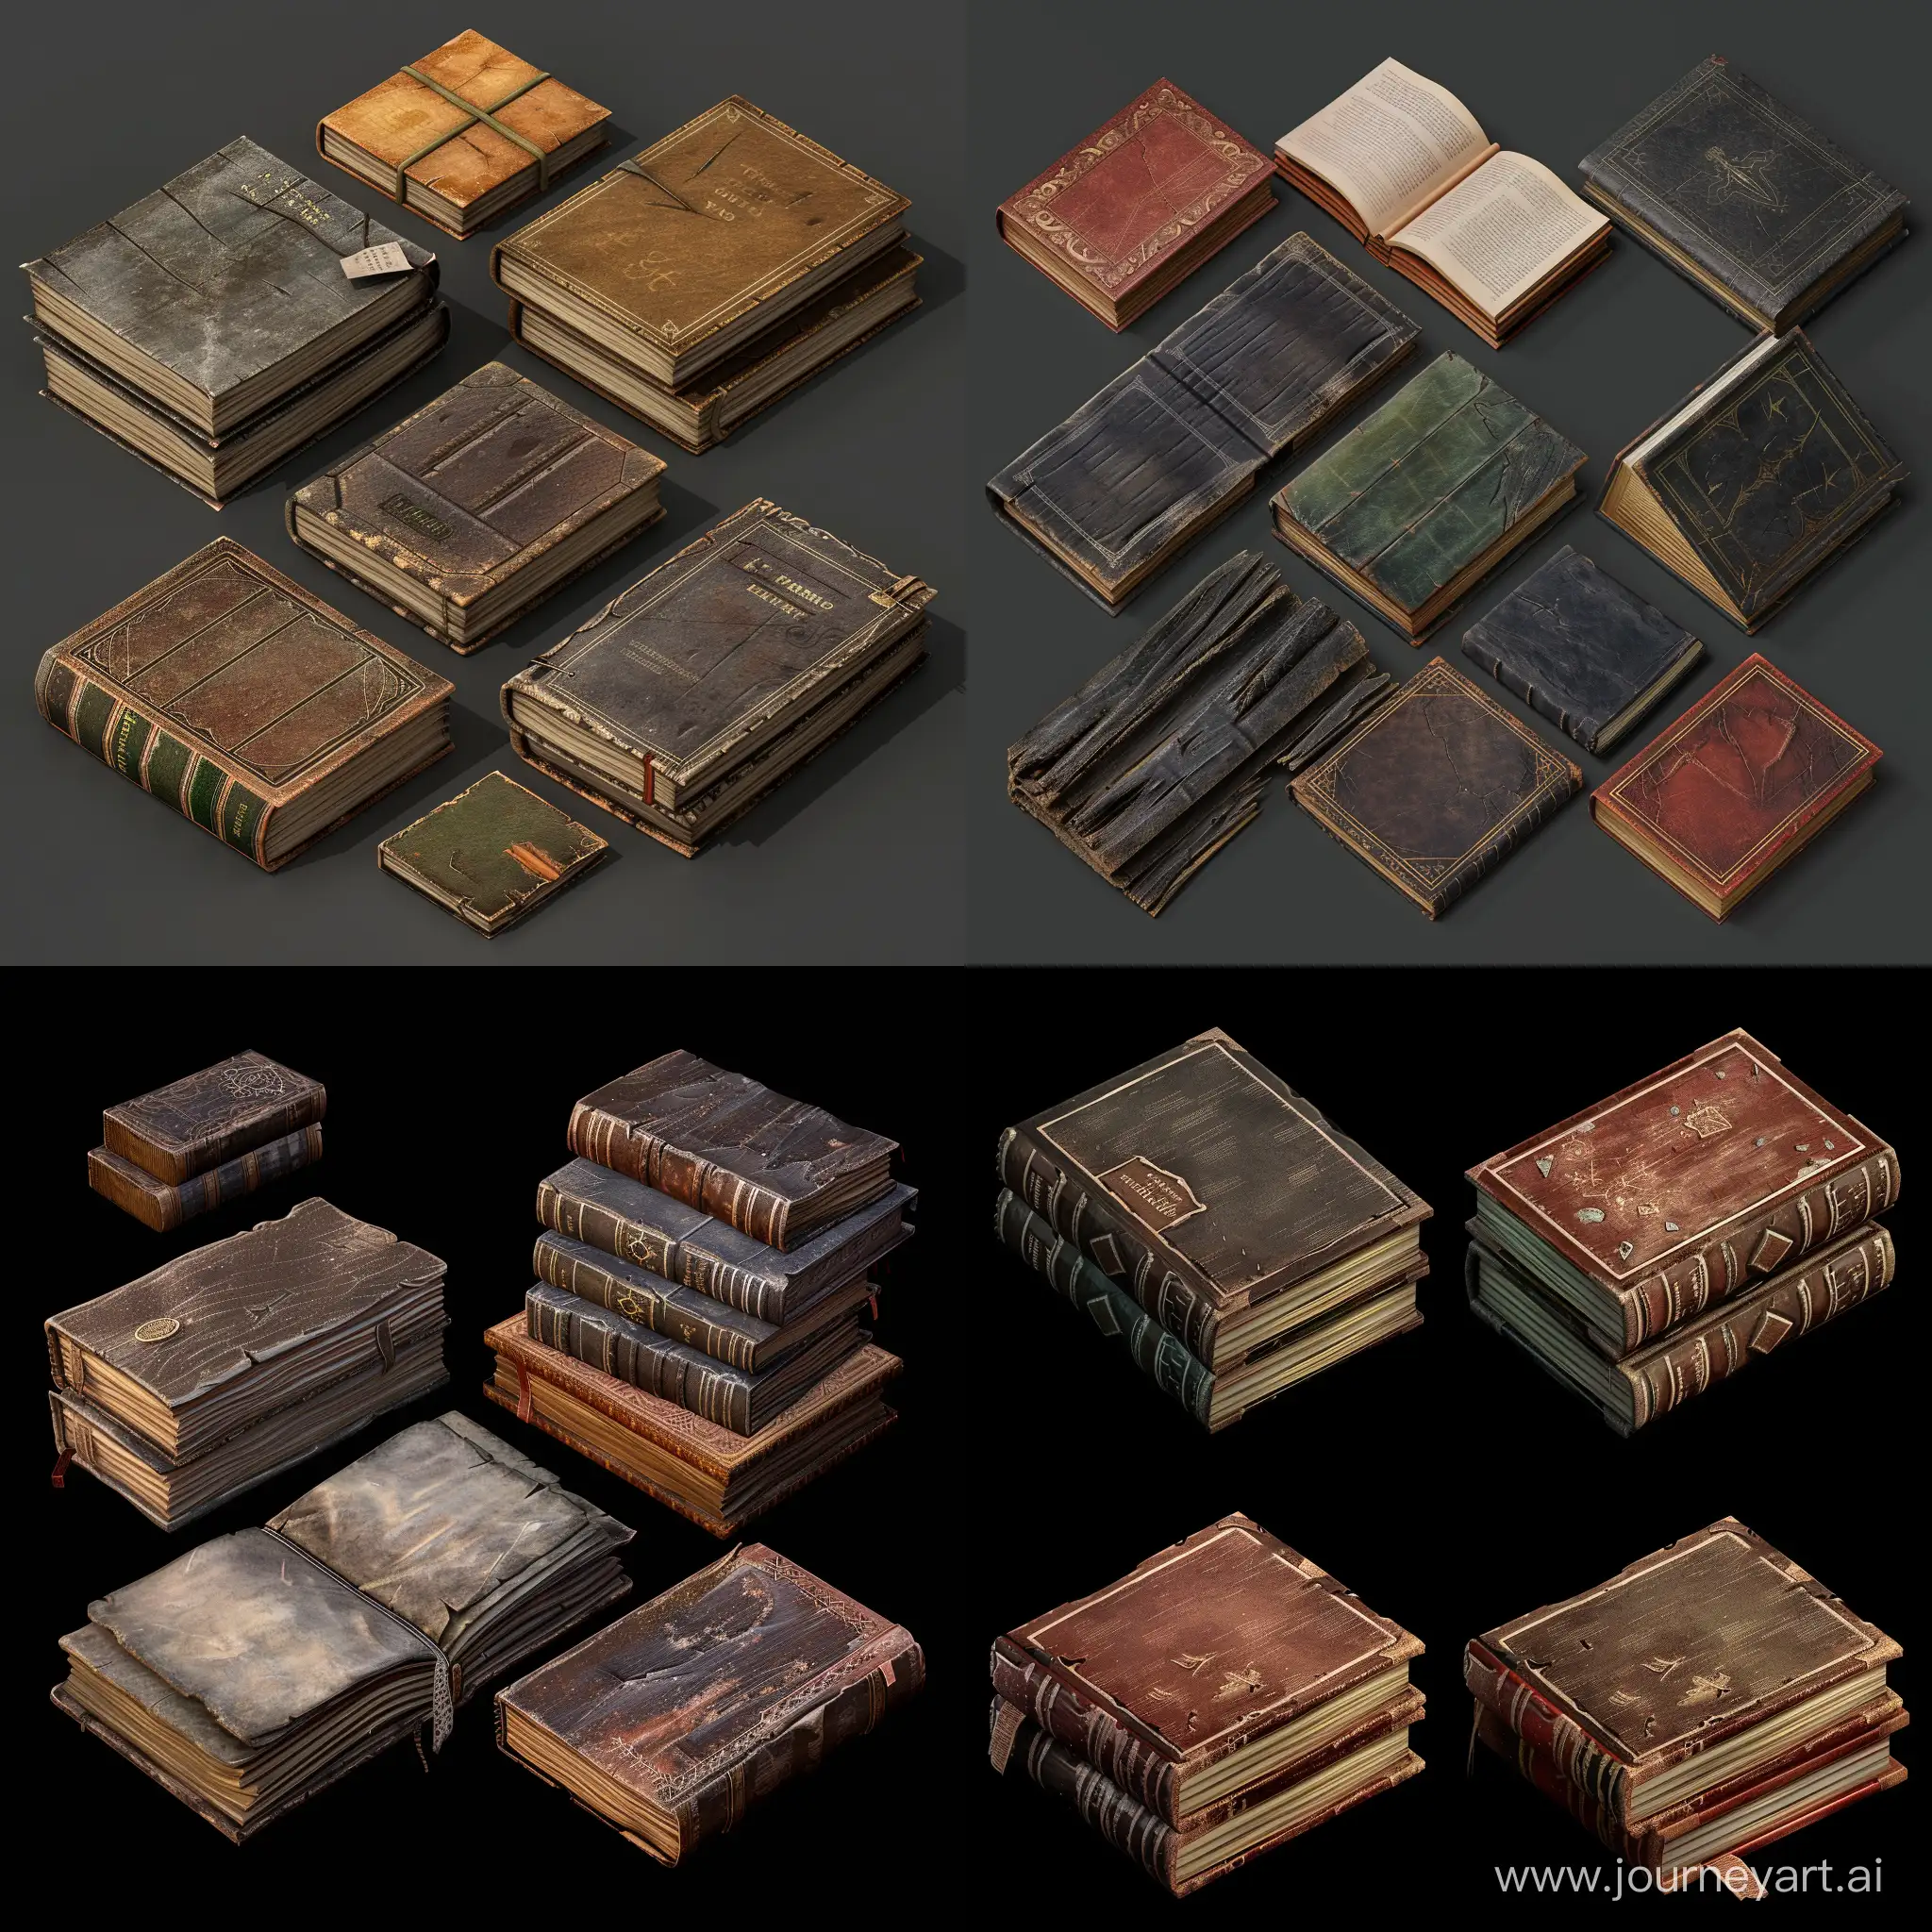 Isometric-Worn-Book-Set-in-Stalker-Style-Realistic-3D-Render-Without-Labels